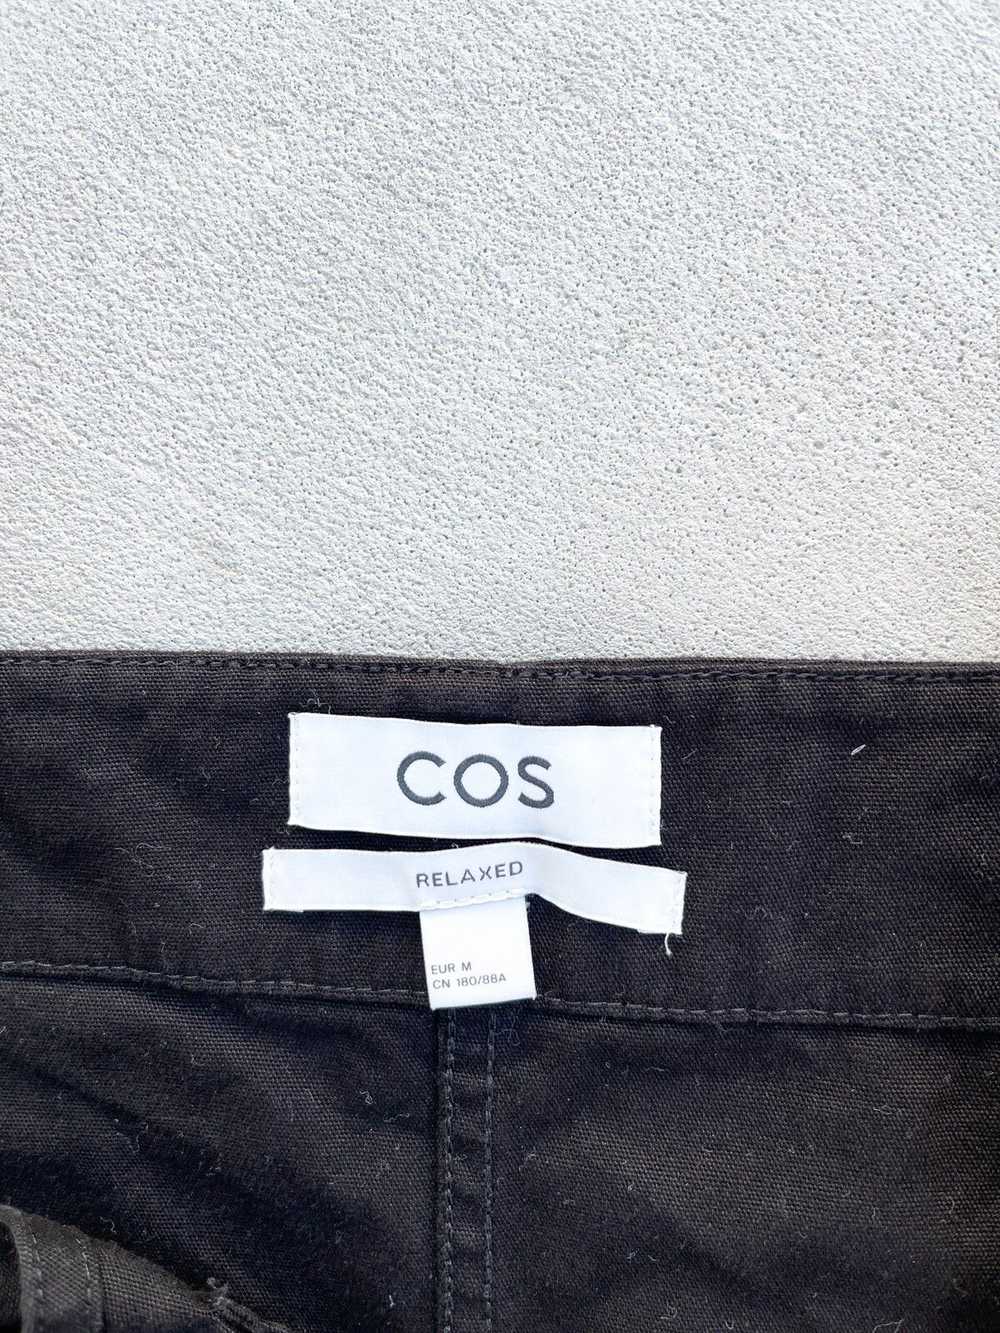 Cos STEAL! 2000s Cos Wide Leg Overalls - image 5